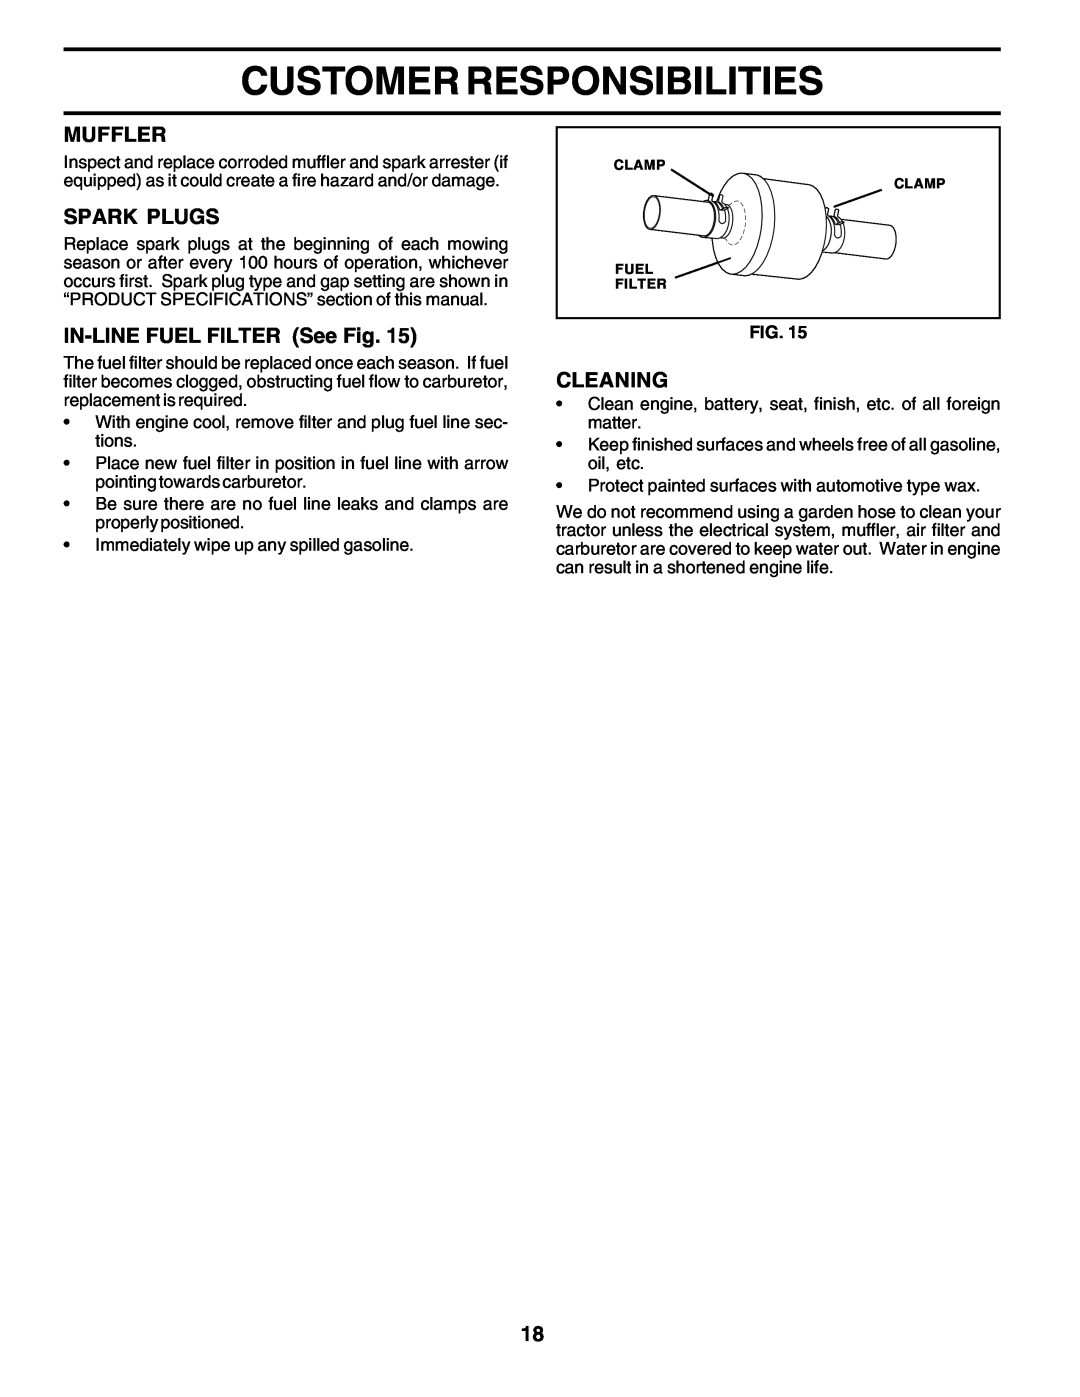 Poulan PO14542D manual Customer Responsibilities, Muffler, Spark Plugs, IN-LINE FUEL FILTER See Fig, Cleaning 